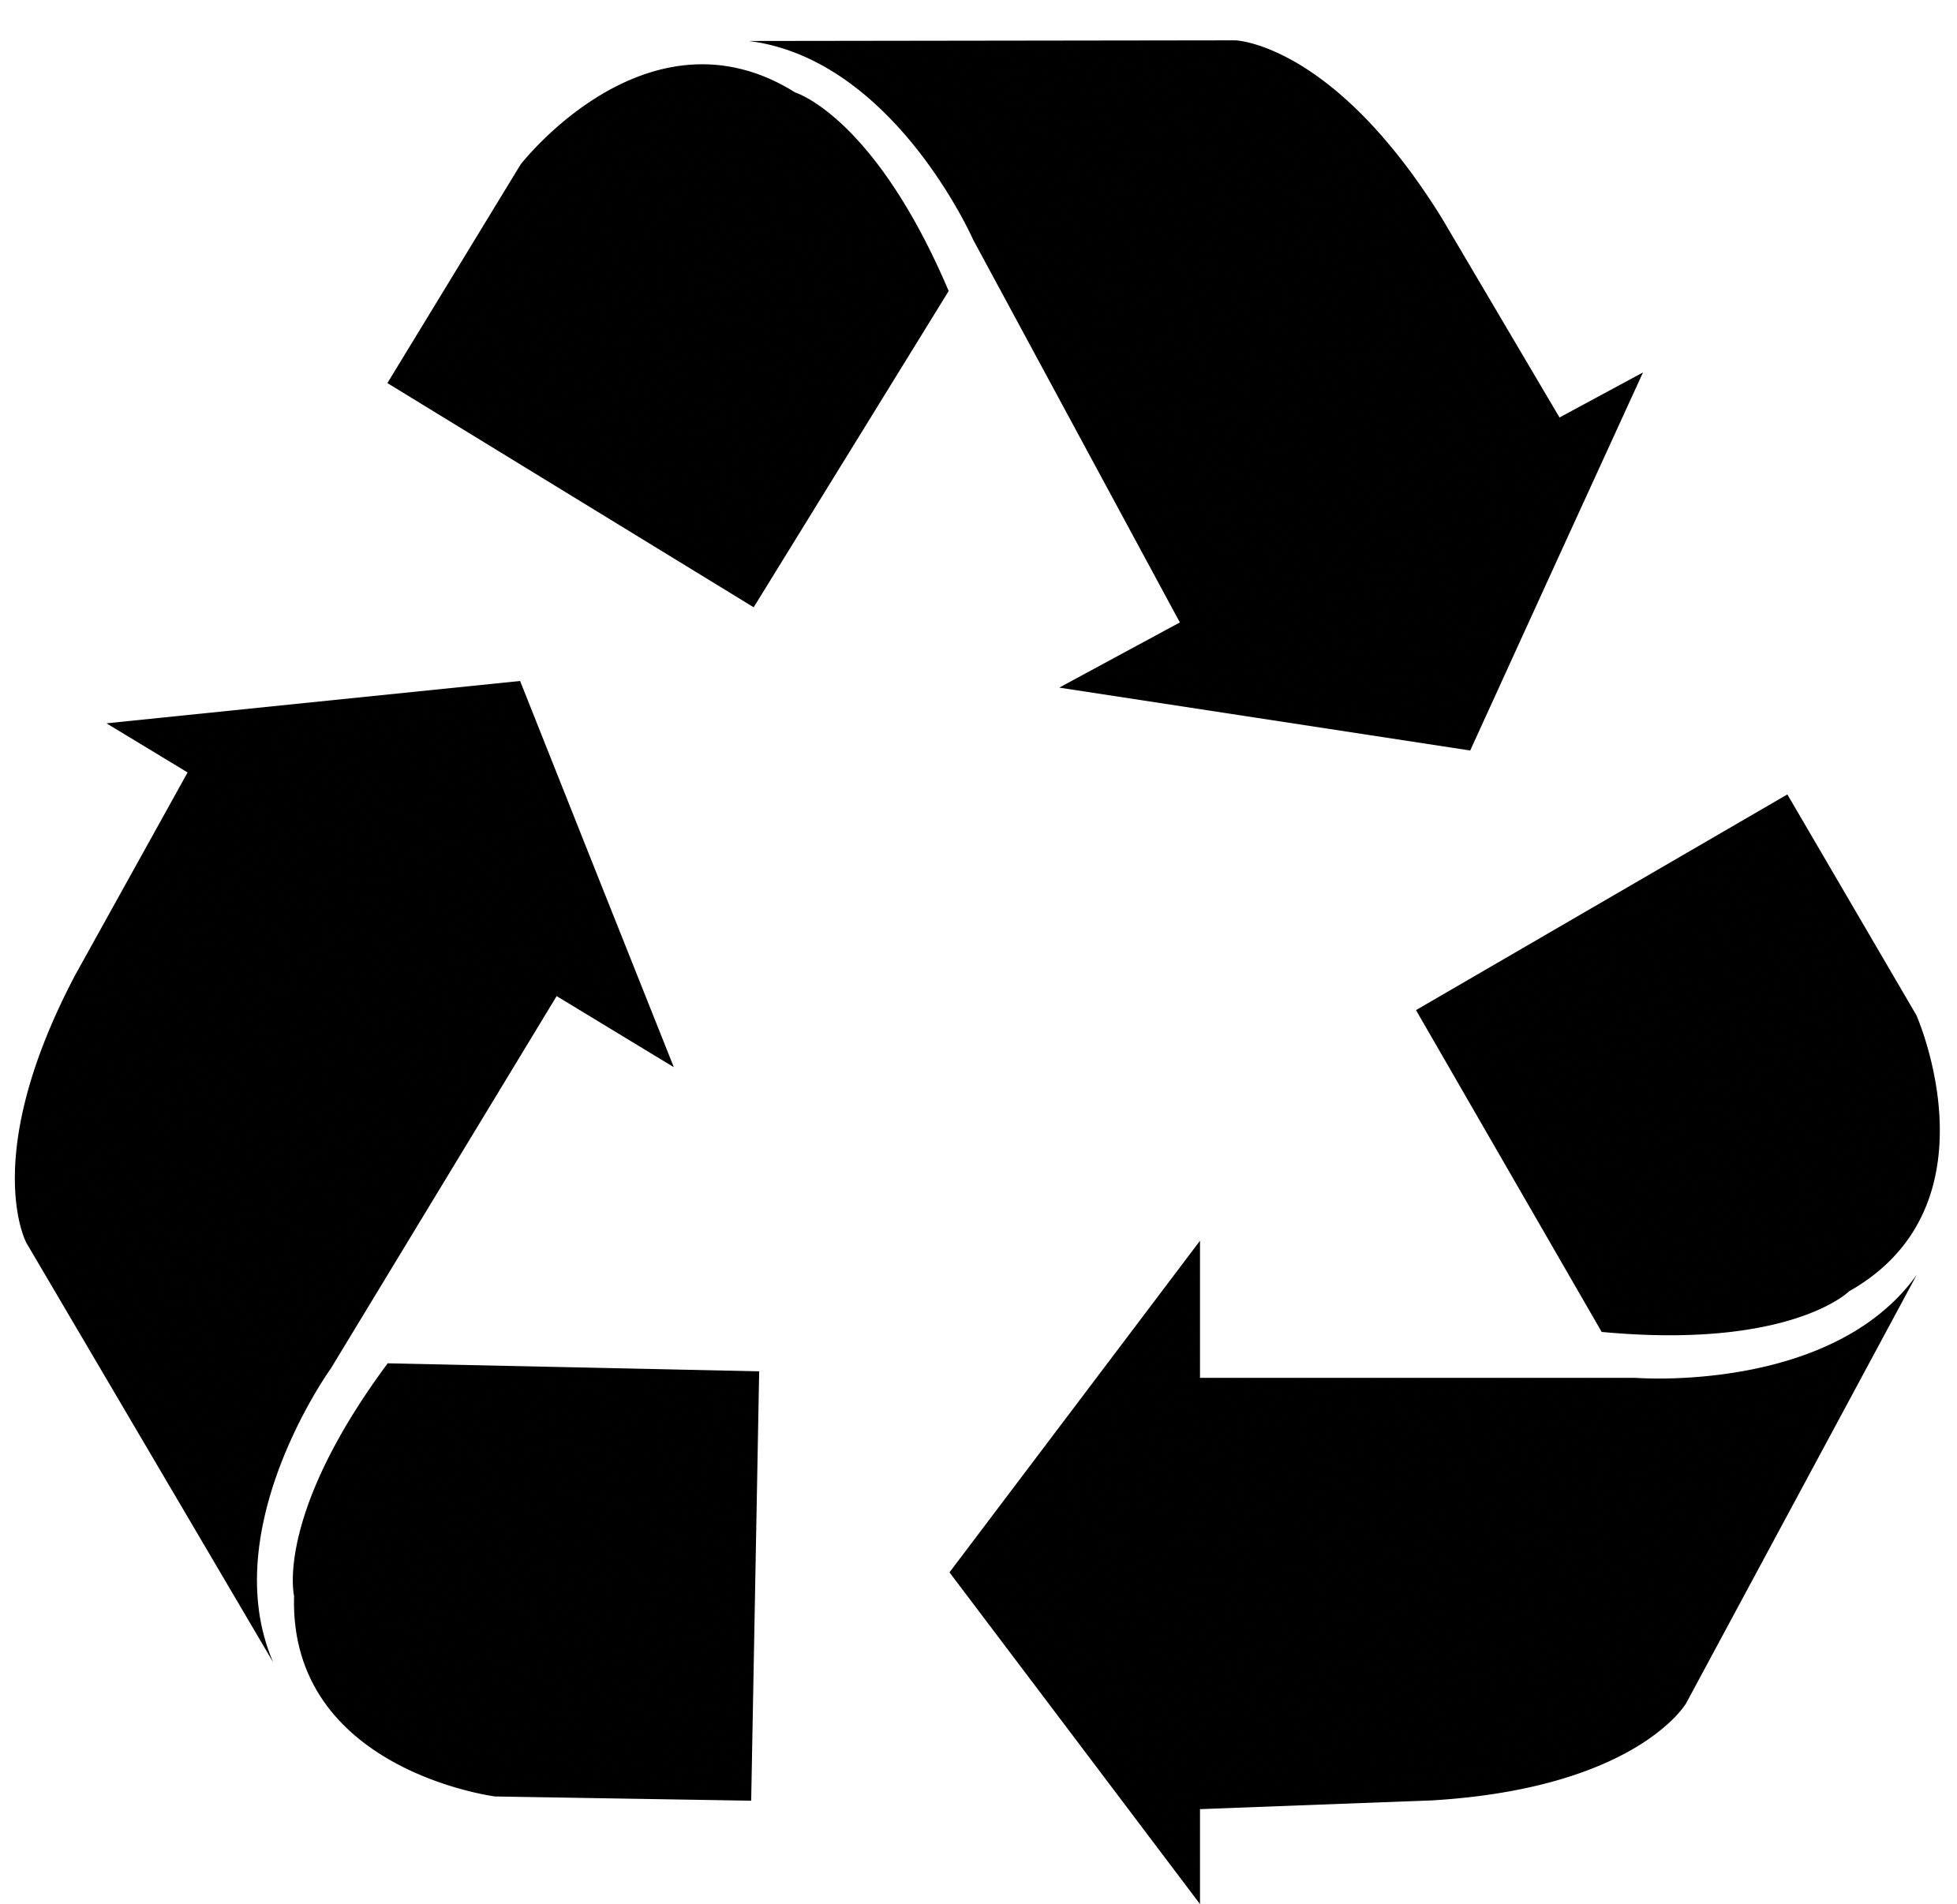 Please Recycle Logo - Free Recycling Sign, Download Free Clip Art, Free Clip Art